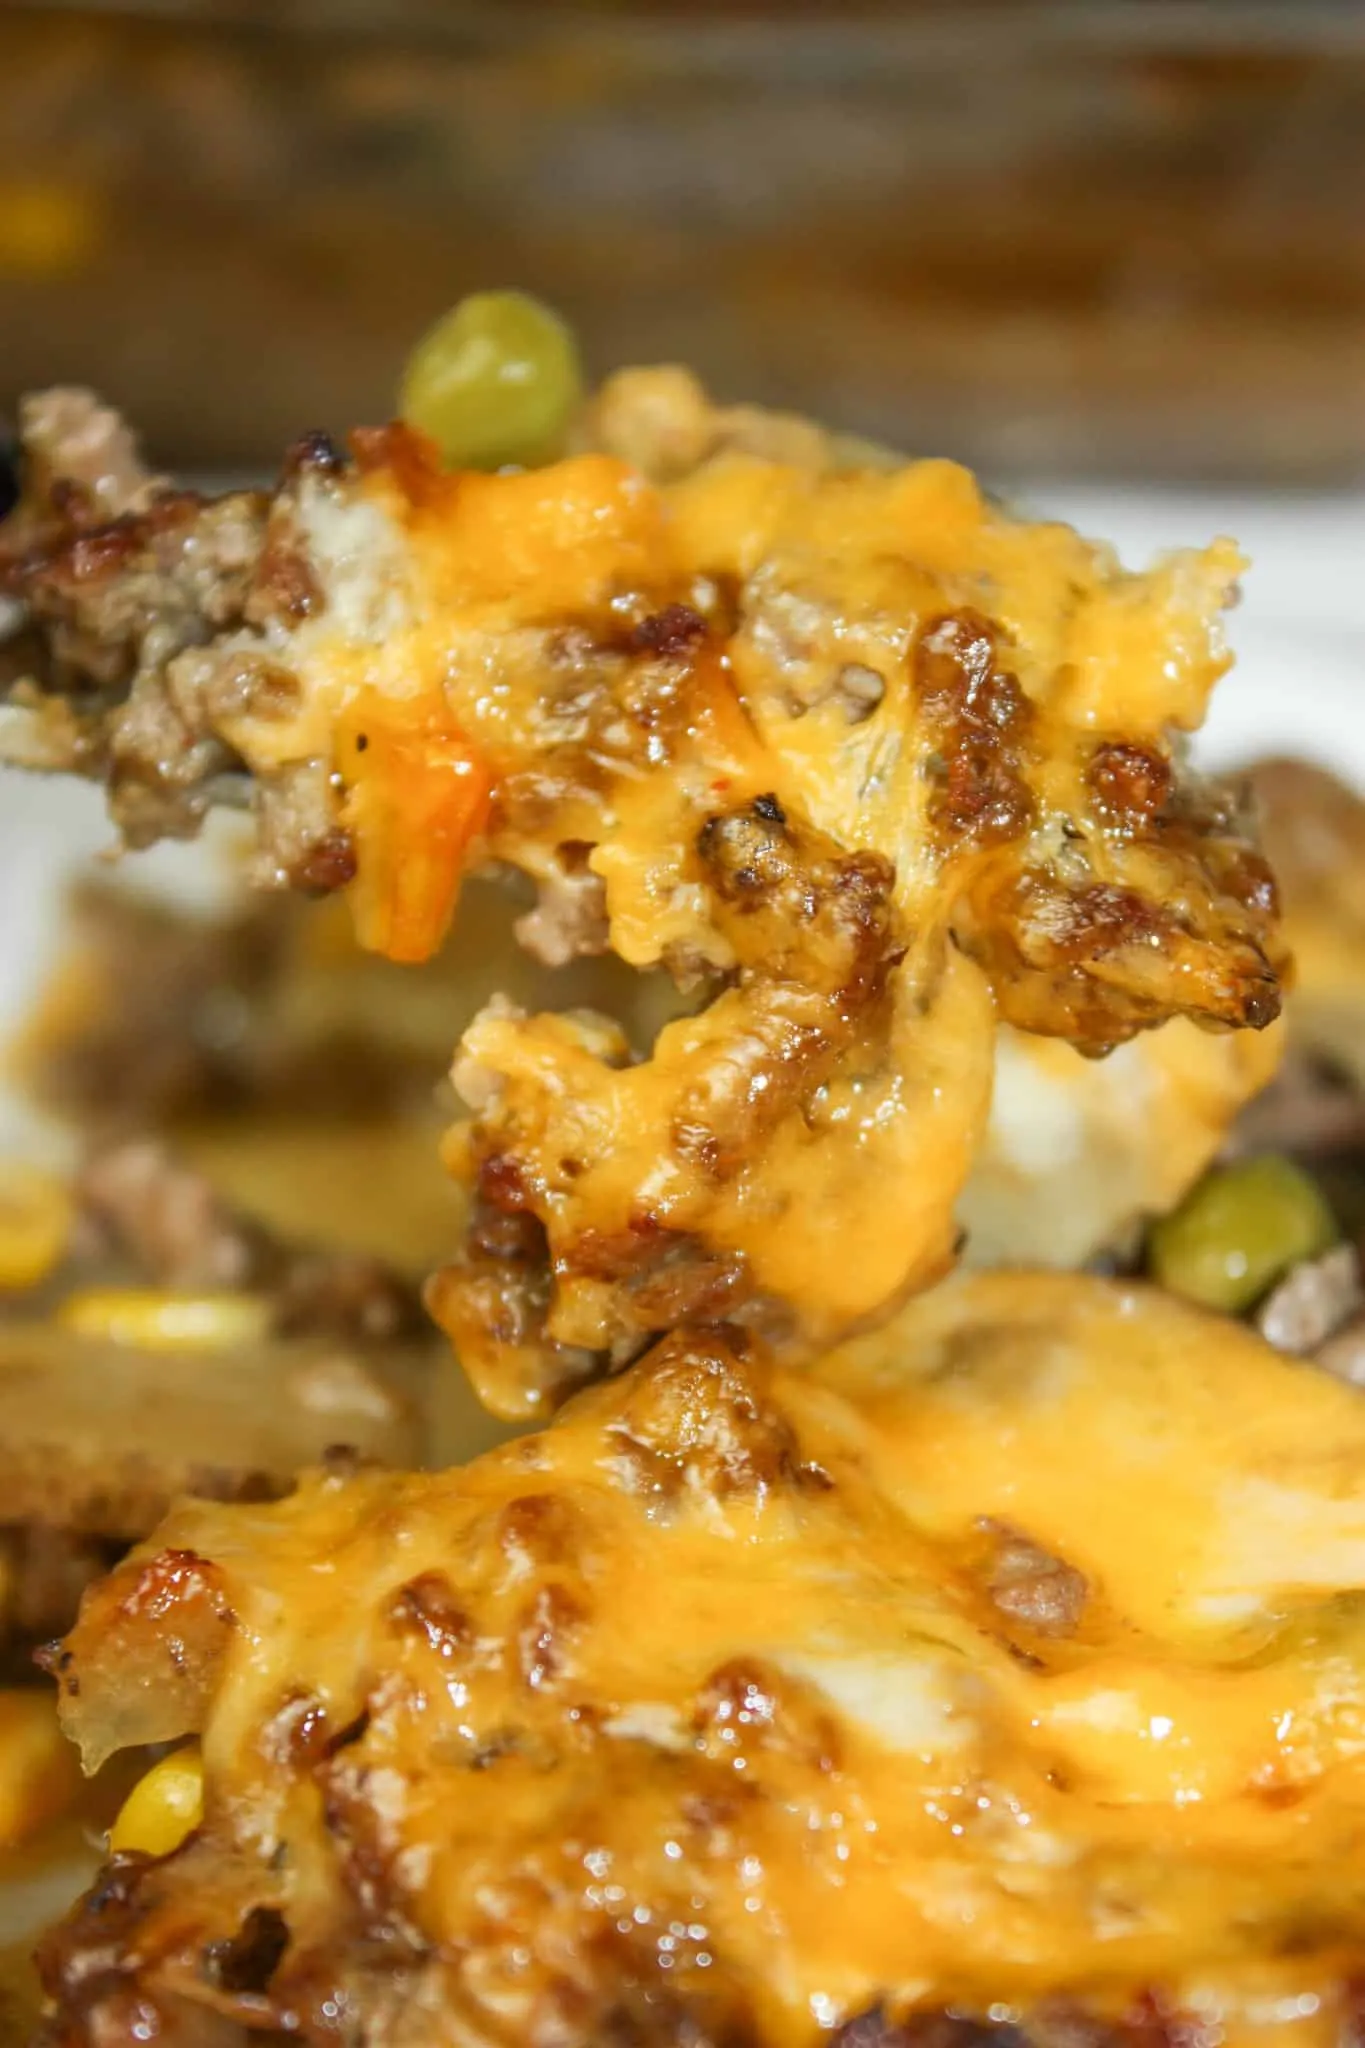 Ground Beef Casserole is a layered dinner recipe that is loaded with potatoes, vegetables and beef.  The gluten free sauce or gravy not only adds moisture but flavour as well.